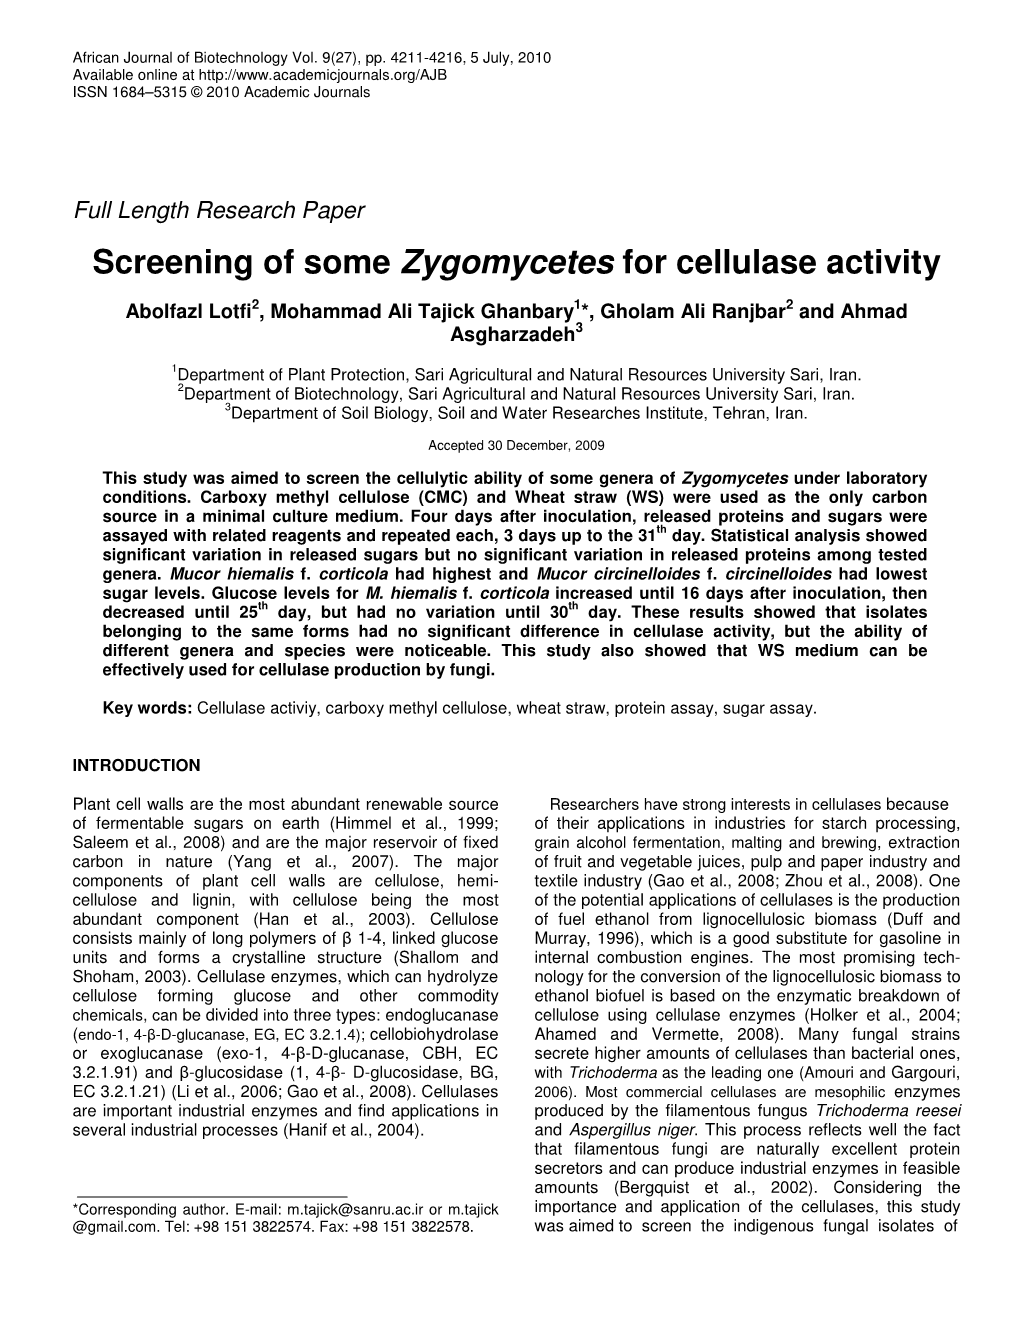 Screening of Some Zygomycetes for Cellulase Activity